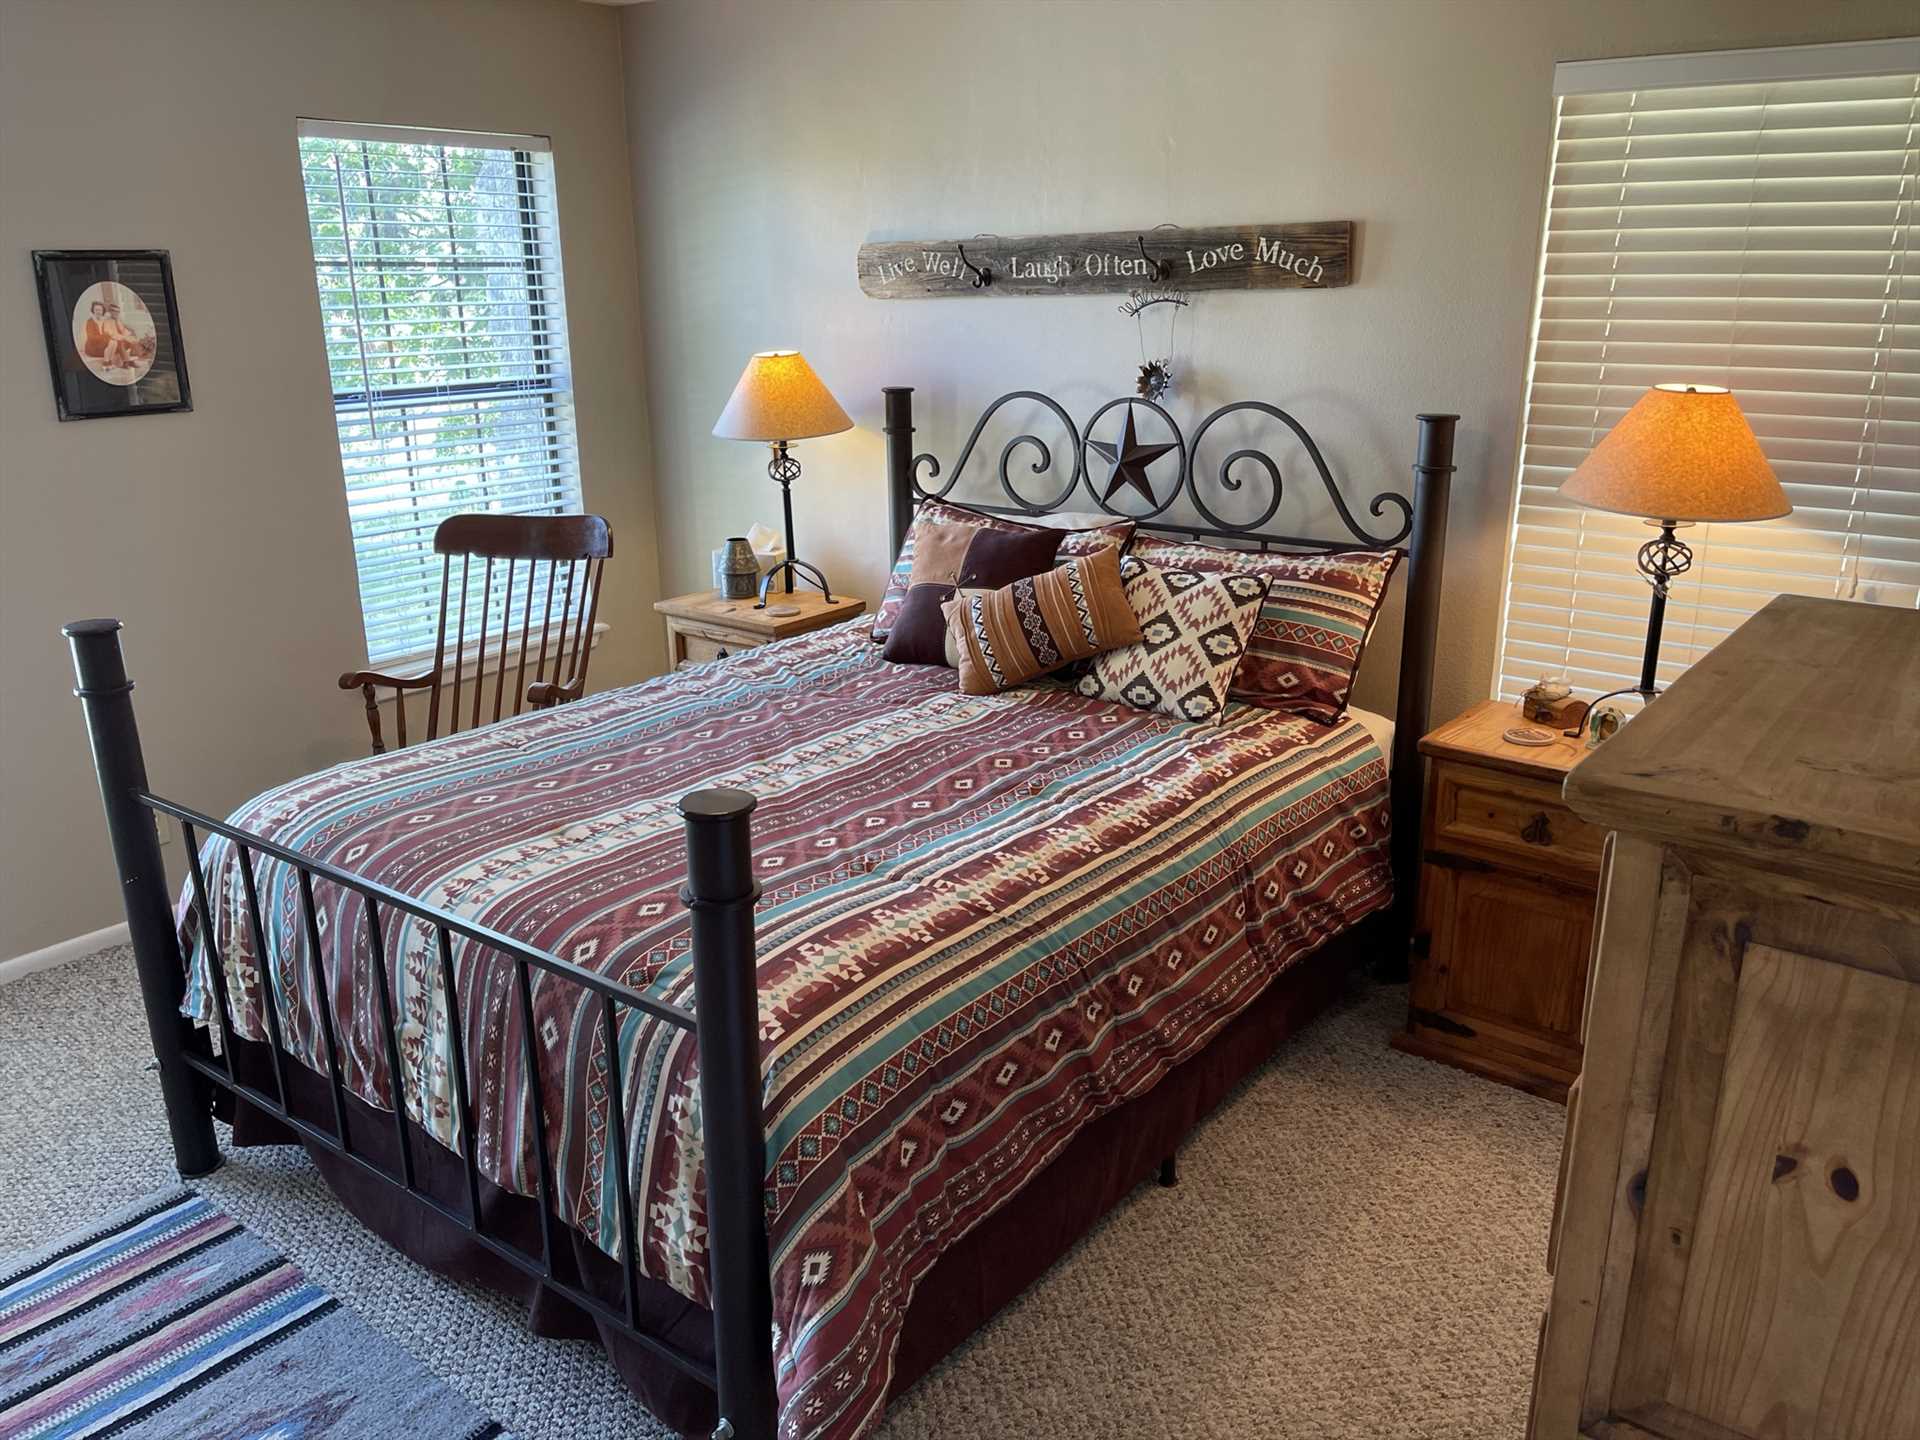                                                 Natural light fills the master bedroom, which features a truly Texan place to sleep: a soft double bed with a Lone Star headboard!